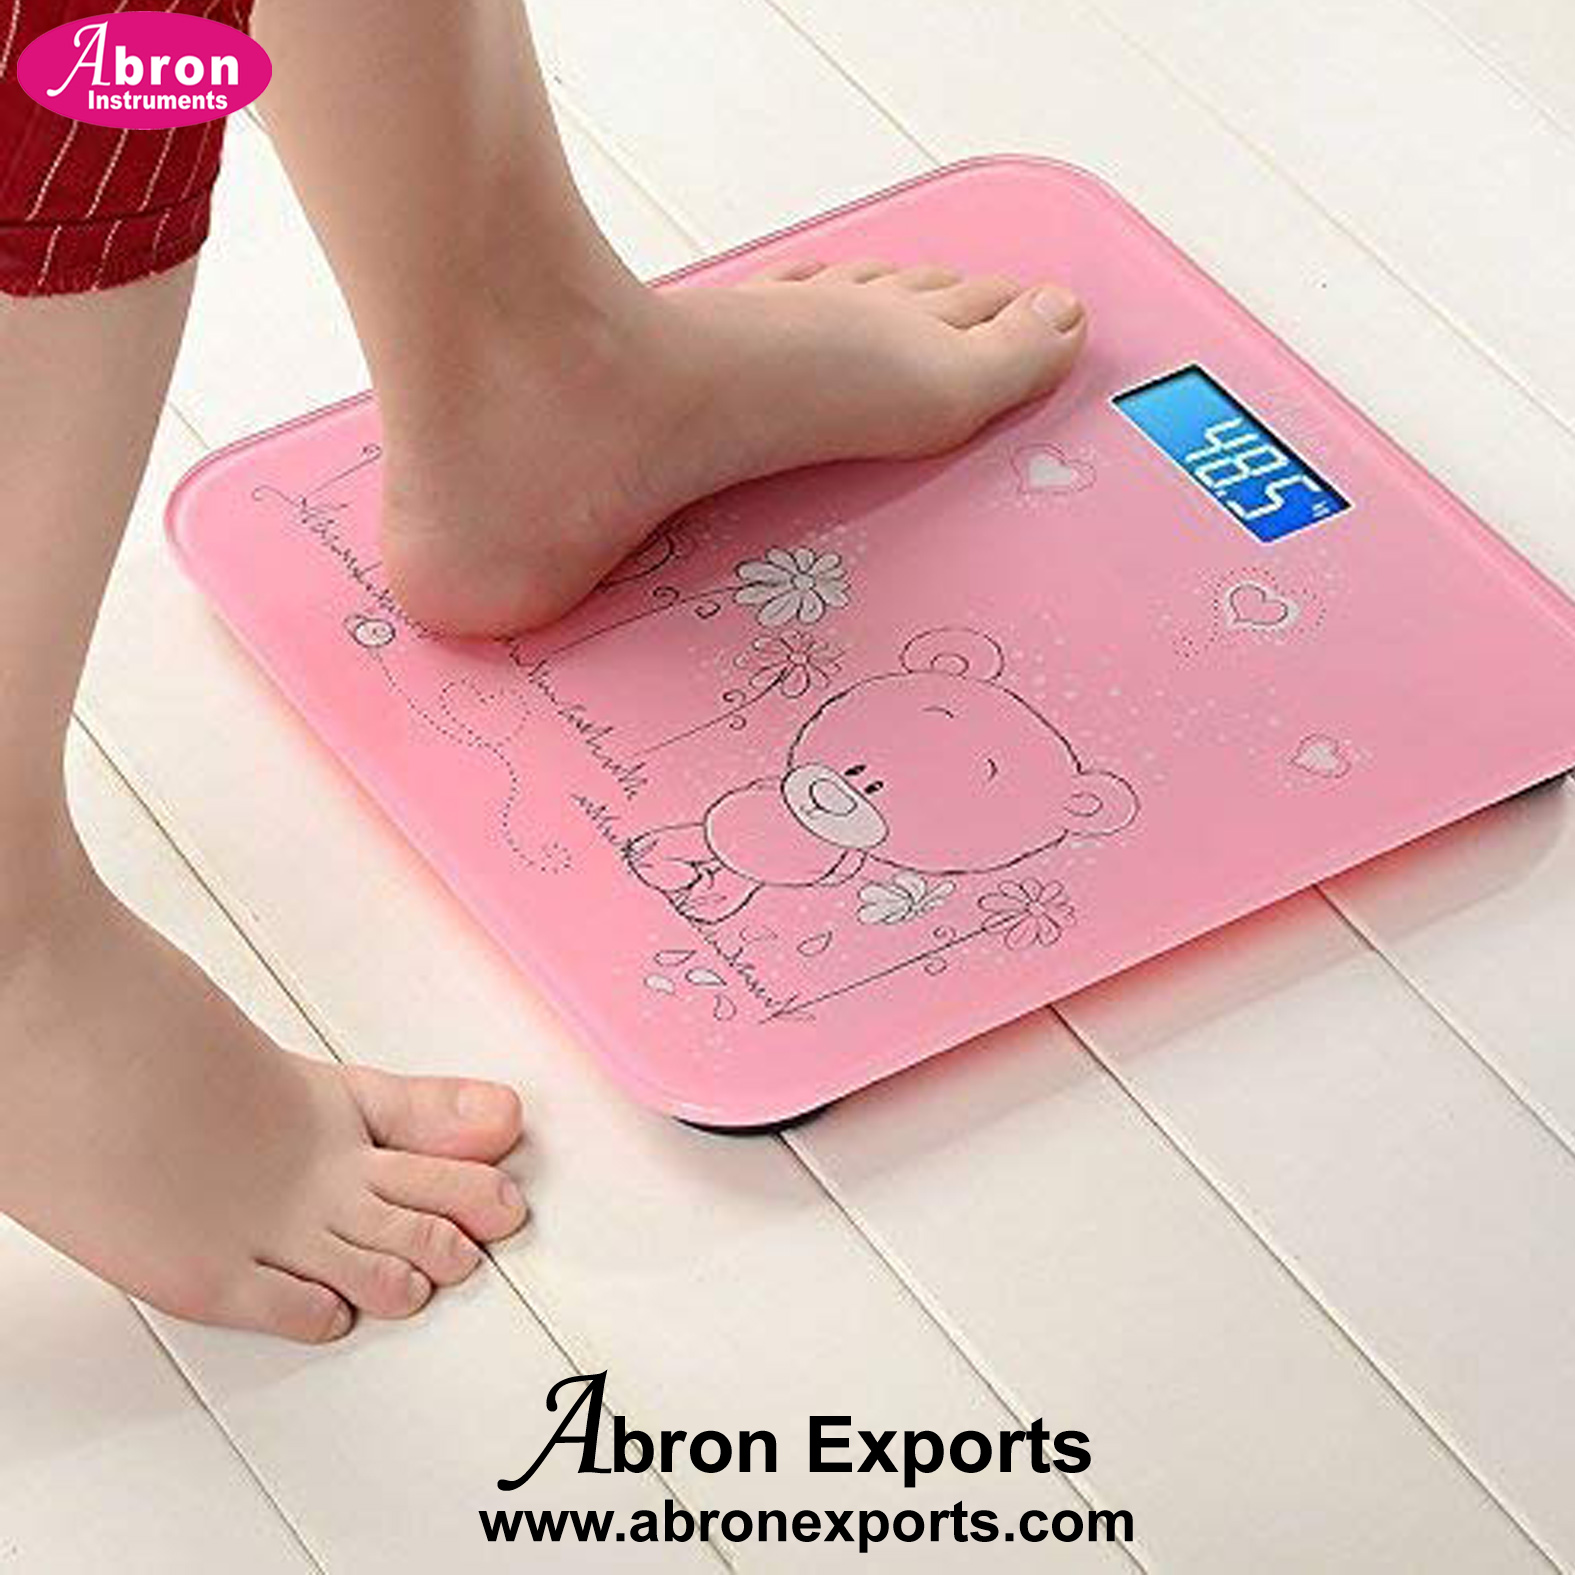 Personal Balance digital weighing scale BMI 150kg x0.1gm Scale weighing ABM-3255BMI